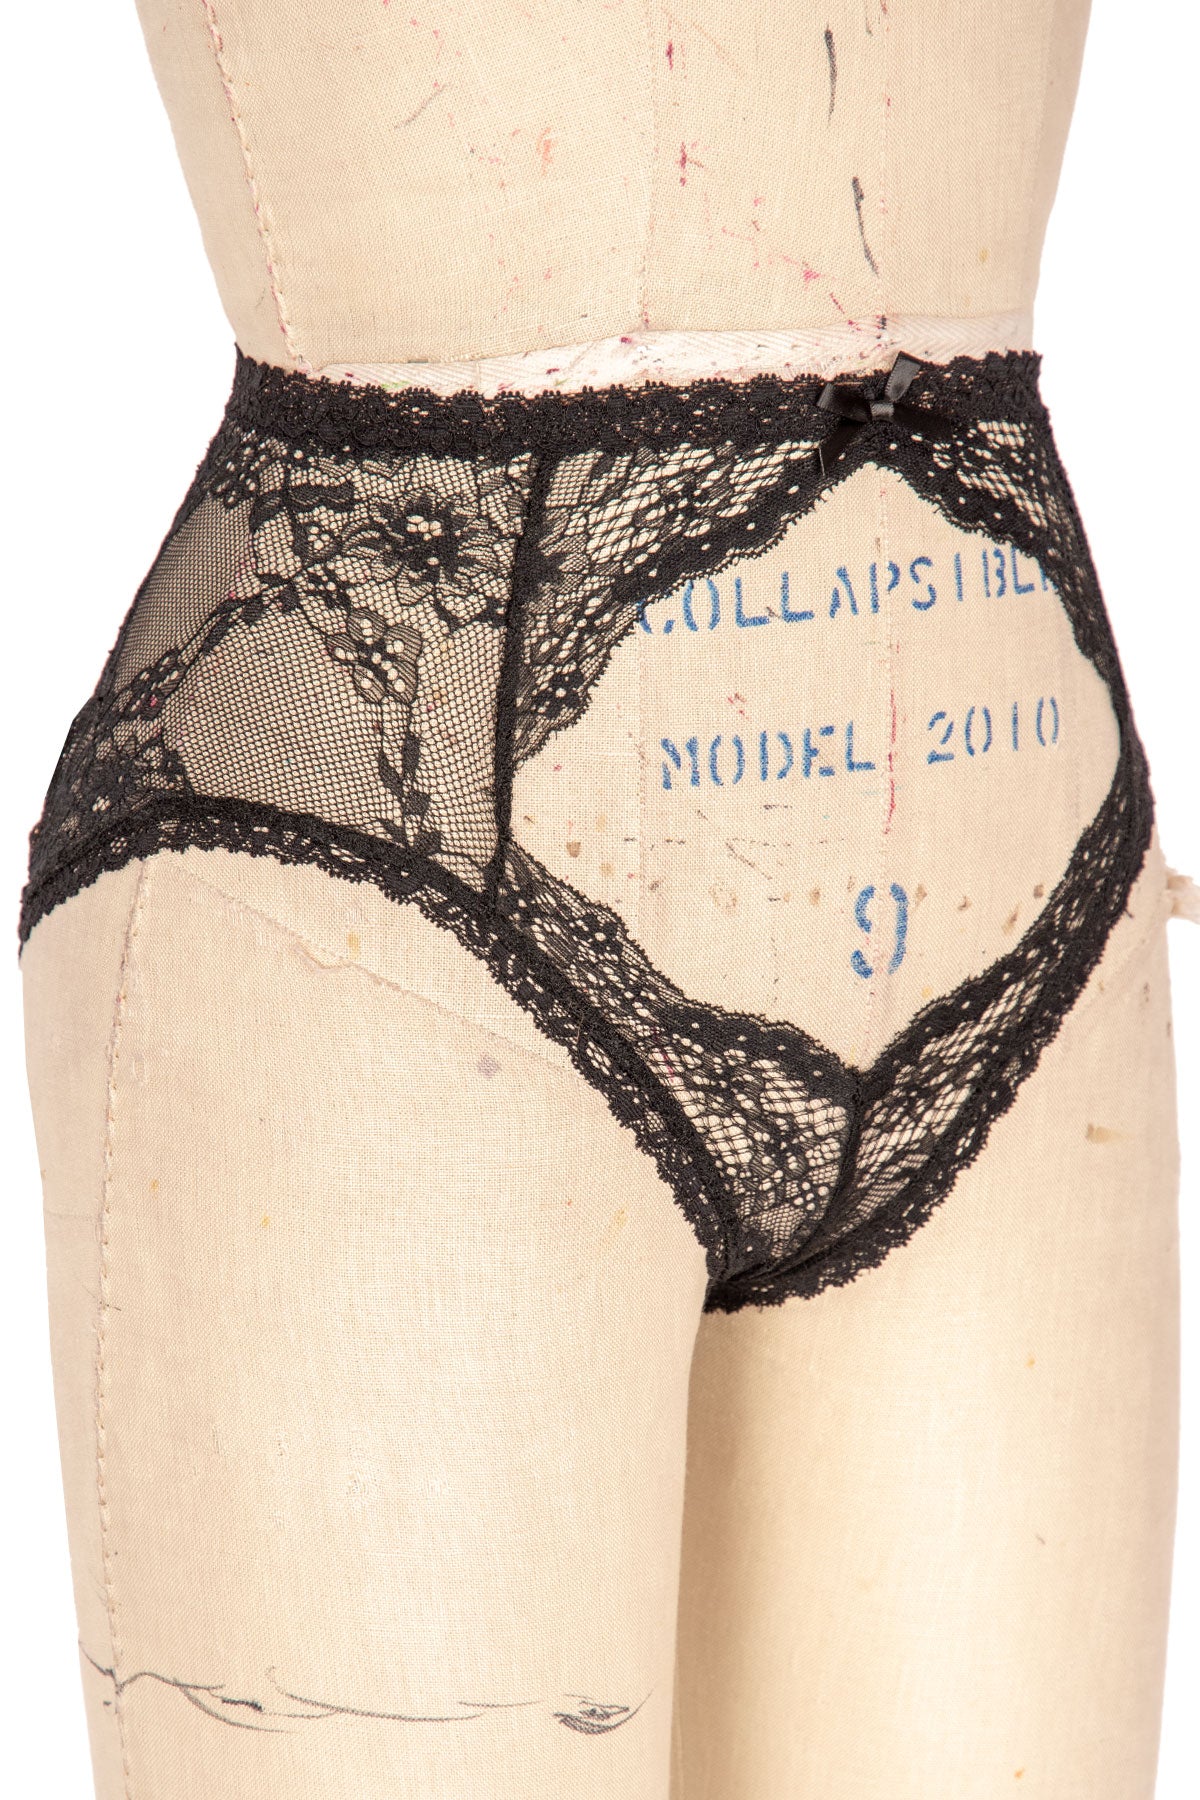 Grace High-Waisted Panty with Open Front & Lattice Butt –